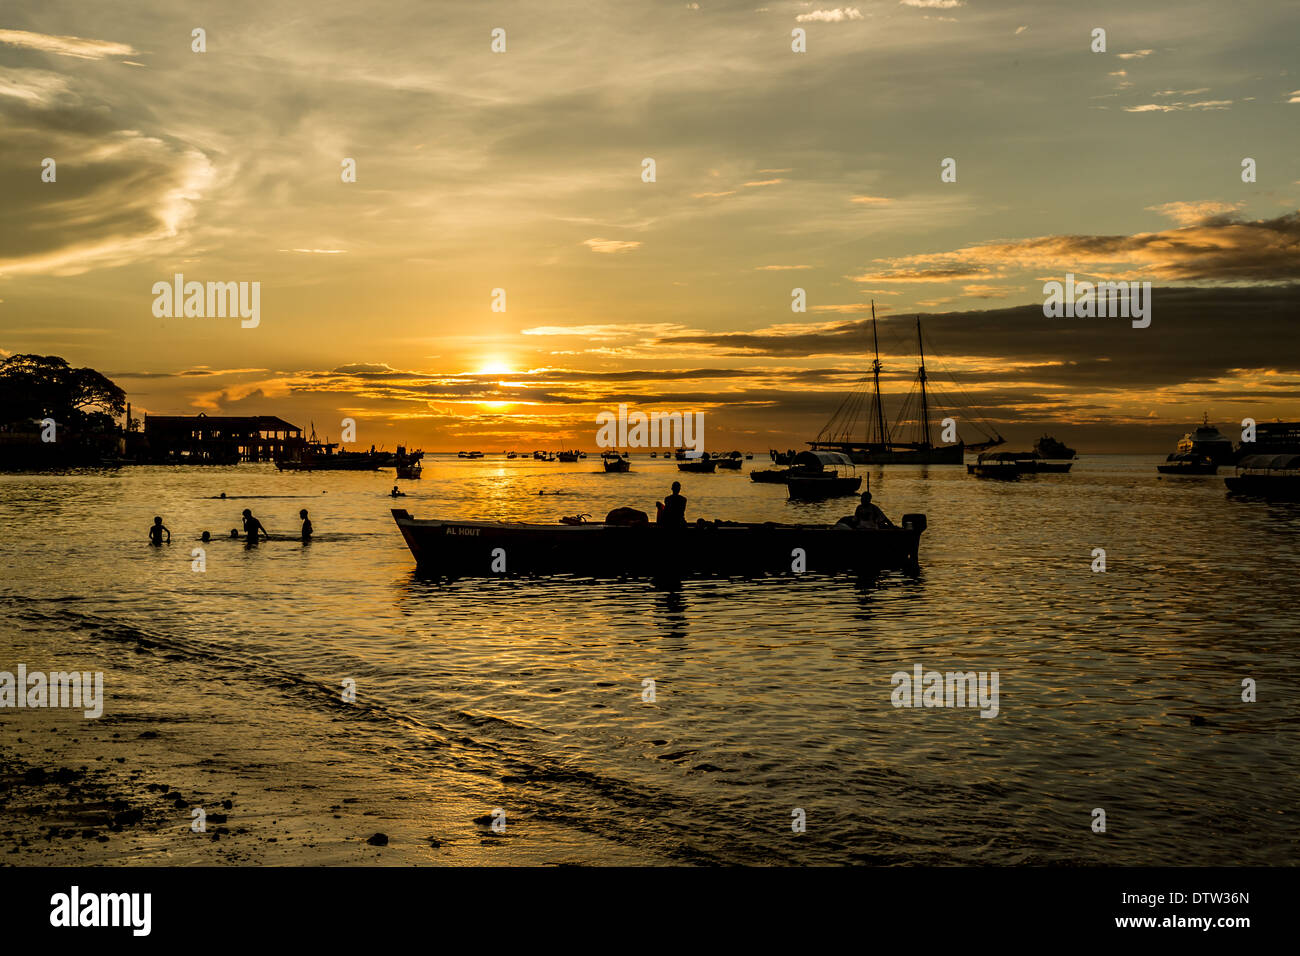 Silhouette of fishermen on the shores of the Indian Ocean during a sunset Stock Photo